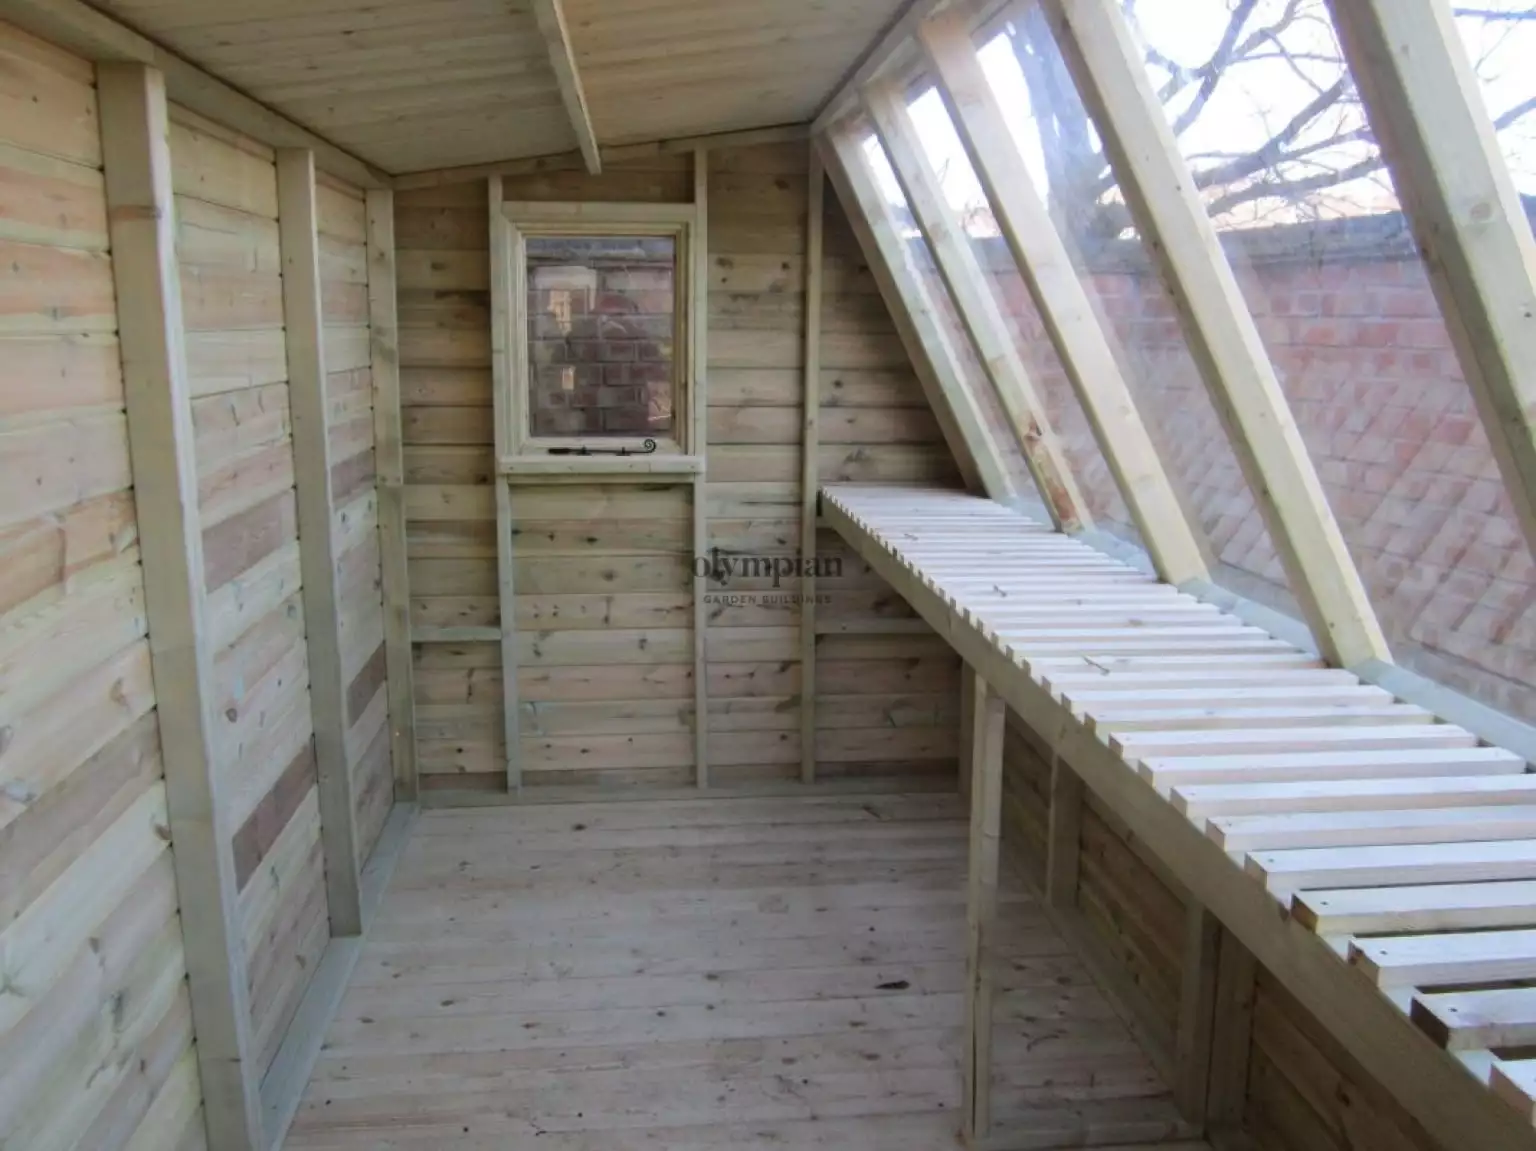 Solar Potting Shed internal view with additional window